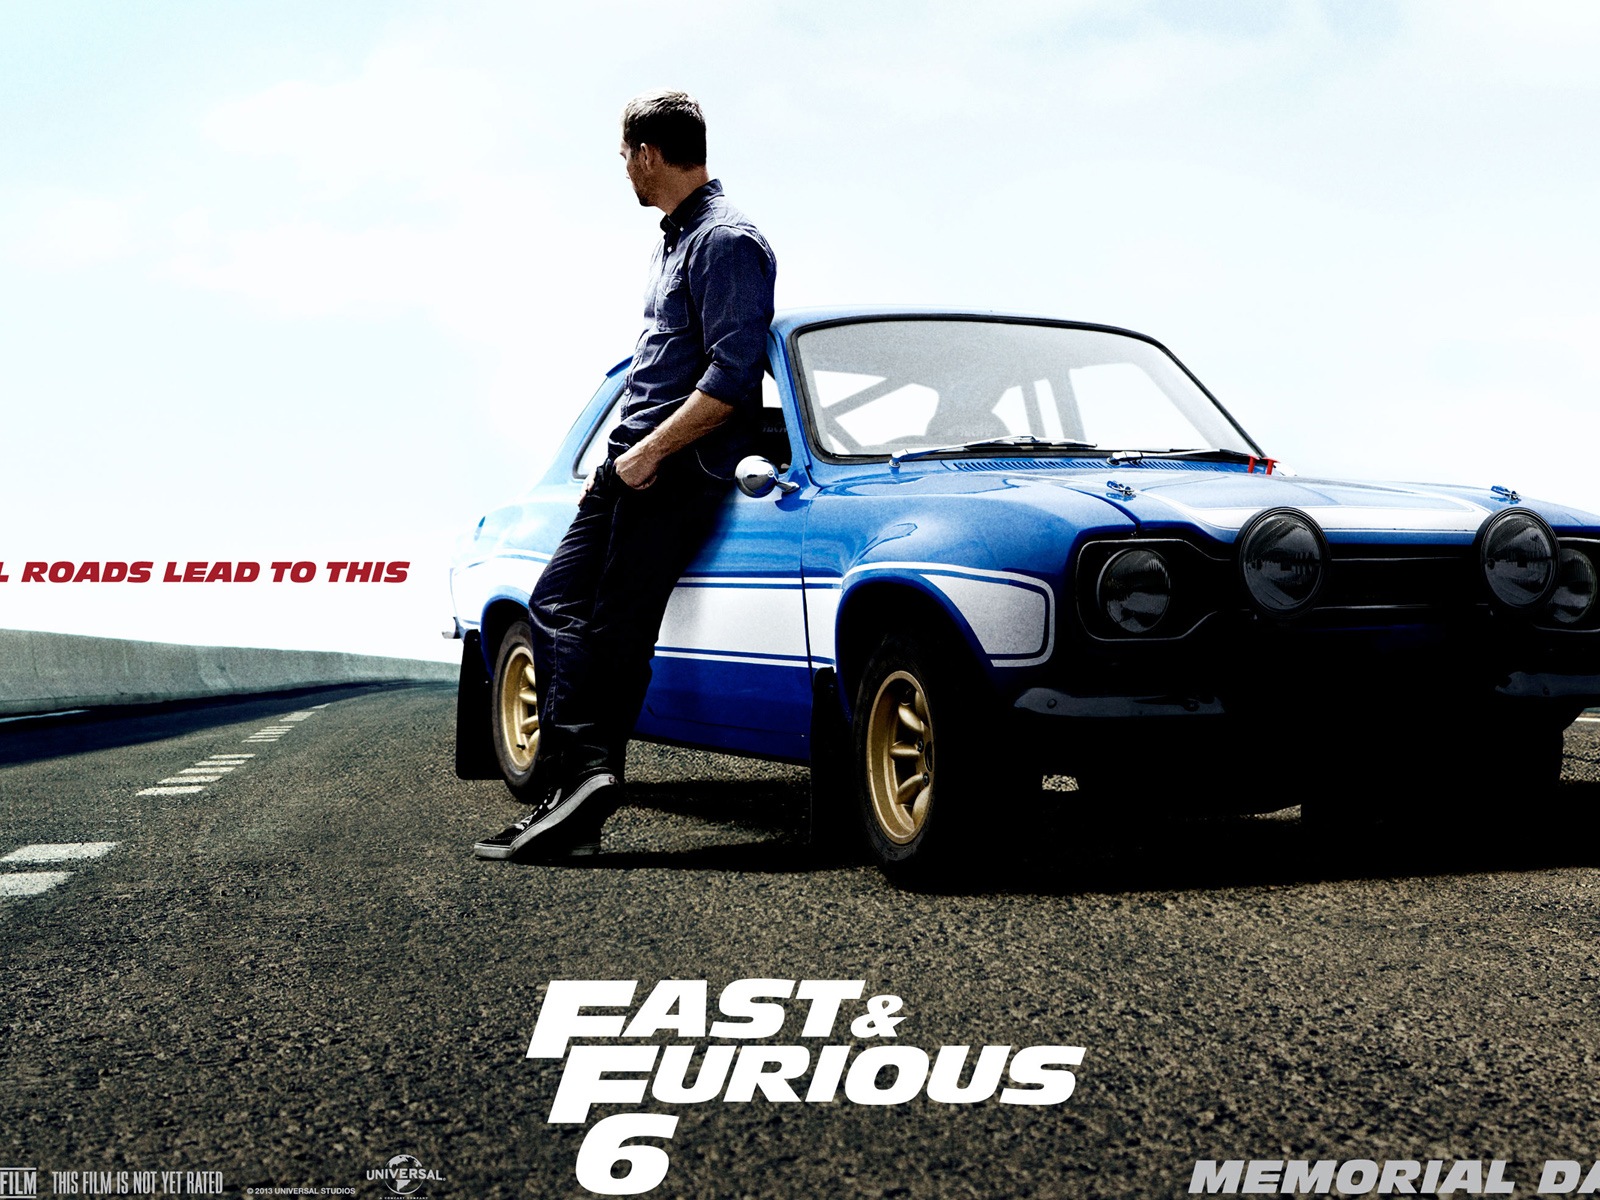 Fast And Furious 6 HD movie wallpapers #10 - 1600x1200